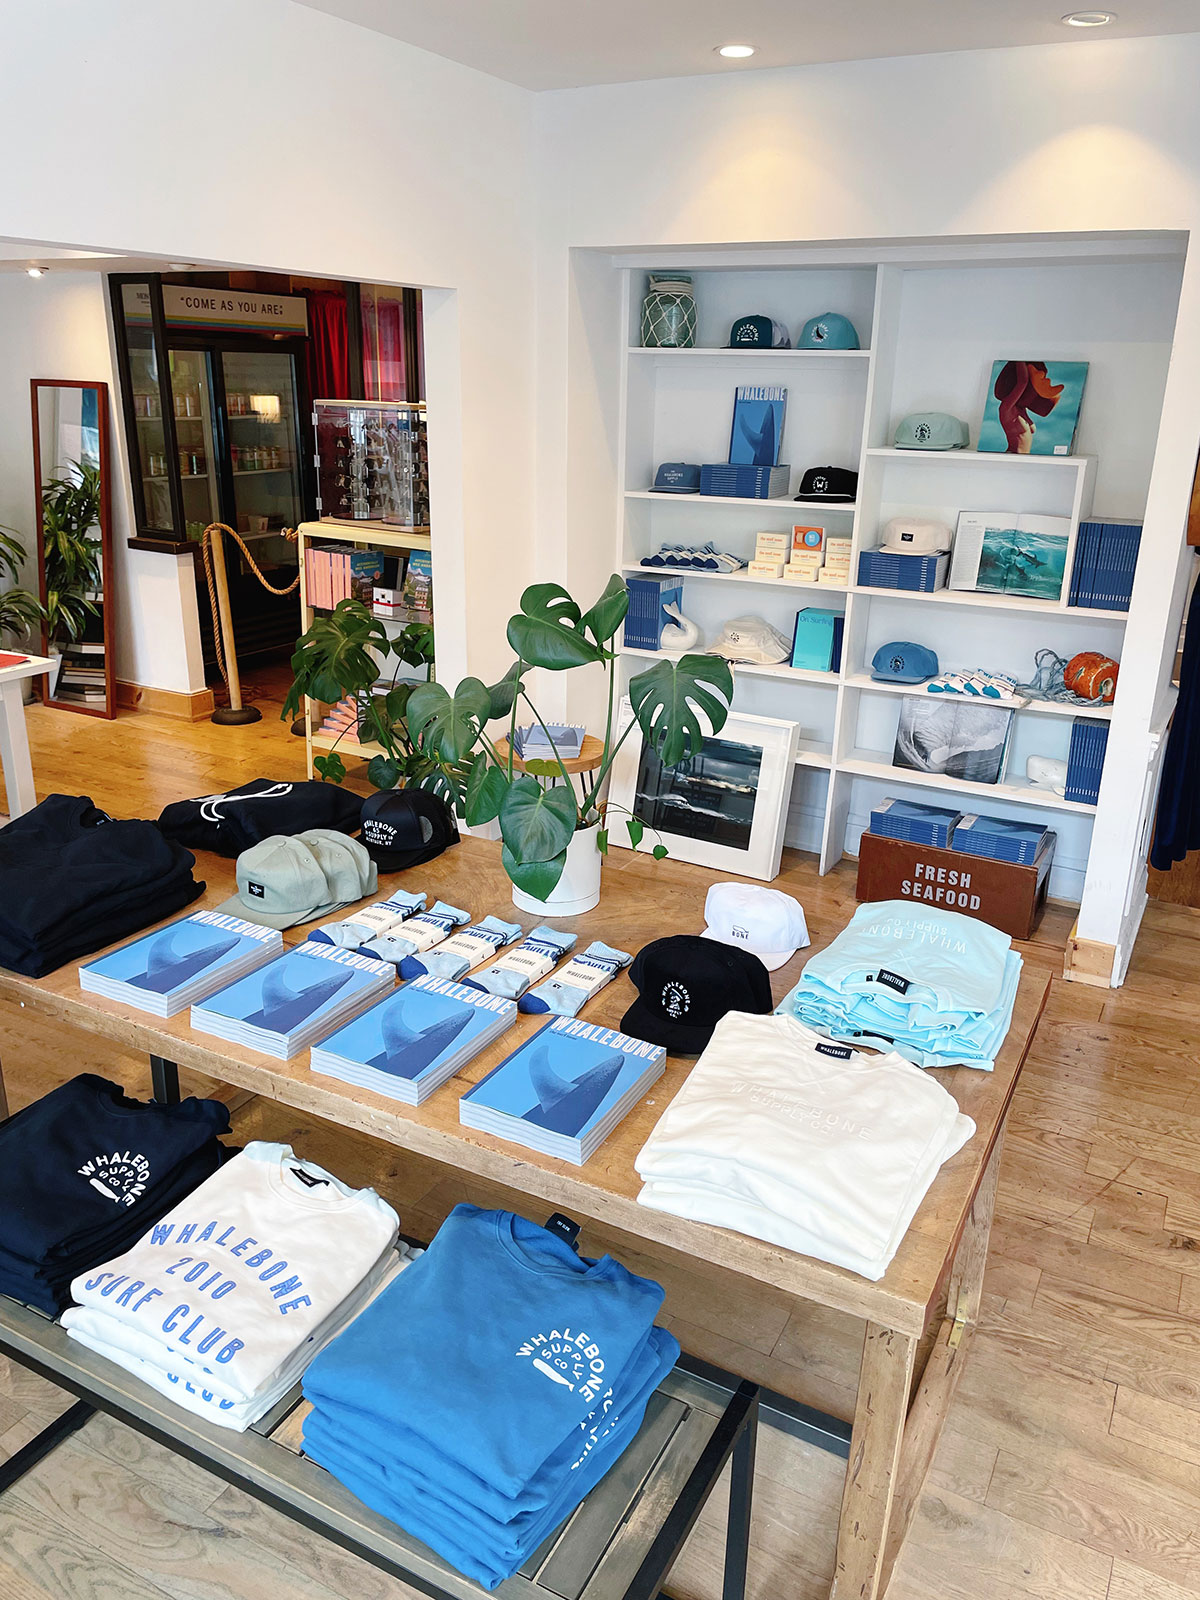 Surf Issue Capsule Collection at the Whalebone Shop on Bleecker